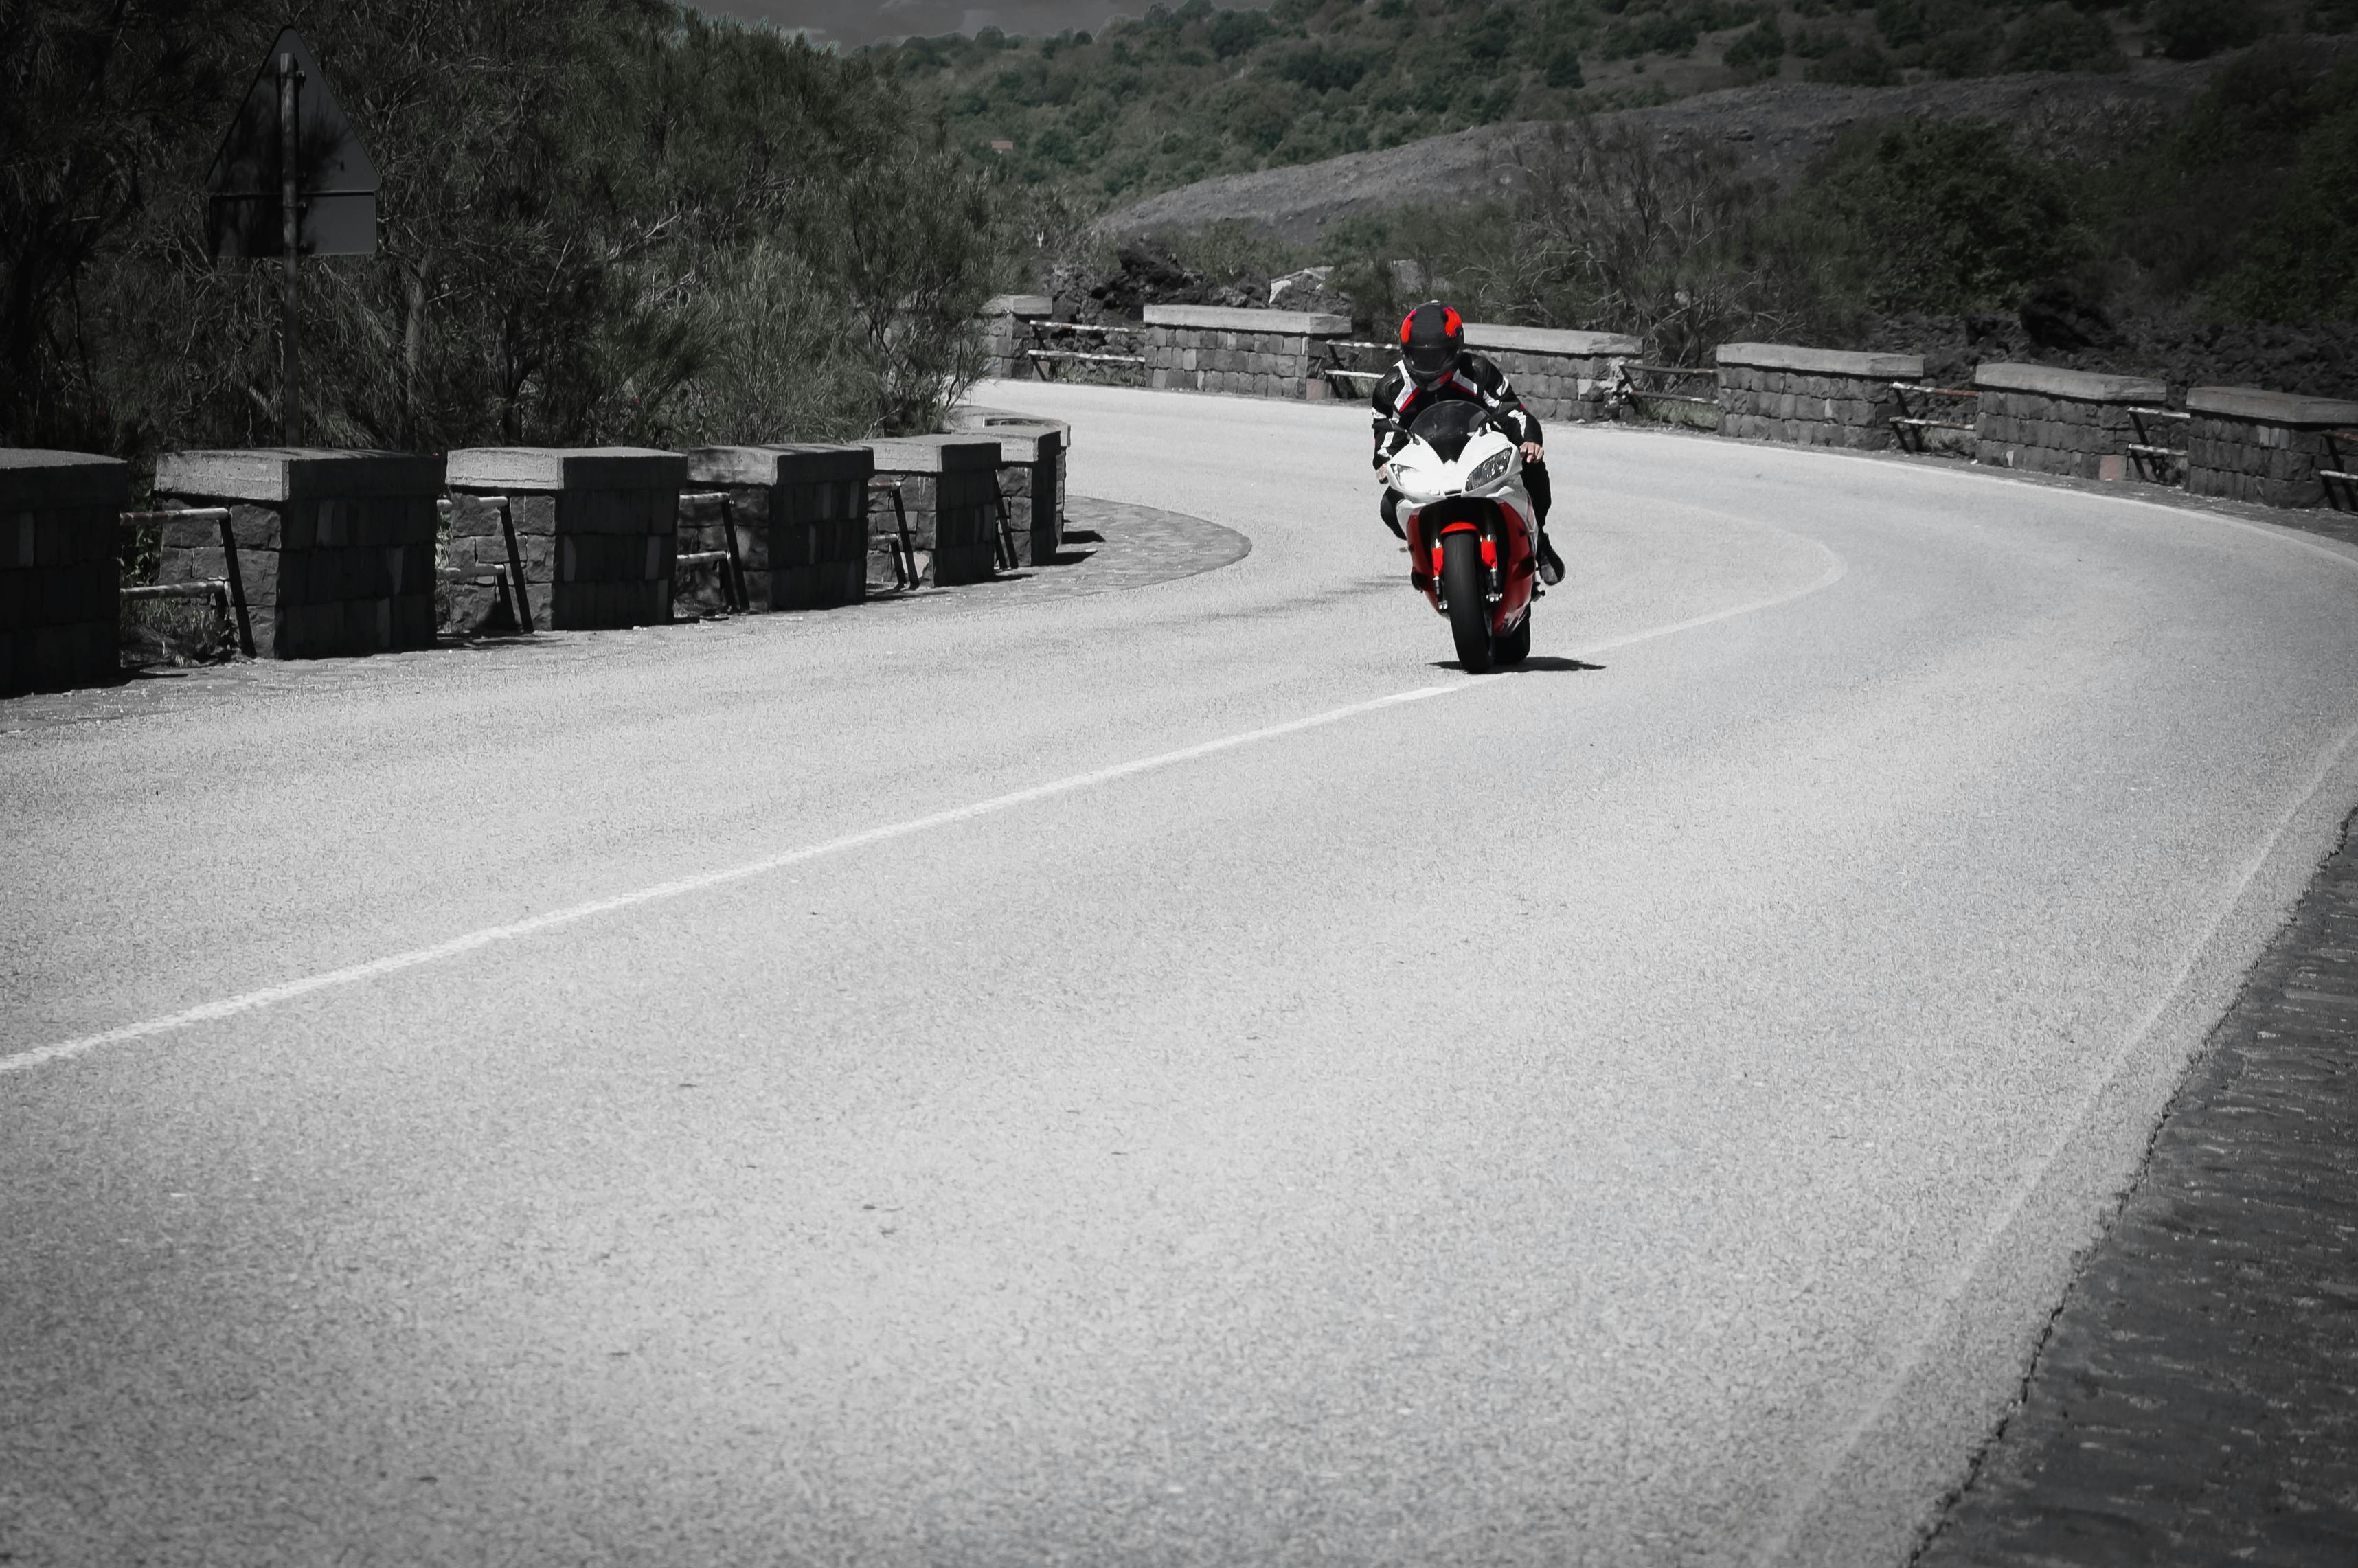 motorcycle rider with helmet riding a sport bike on a scenic curvy road